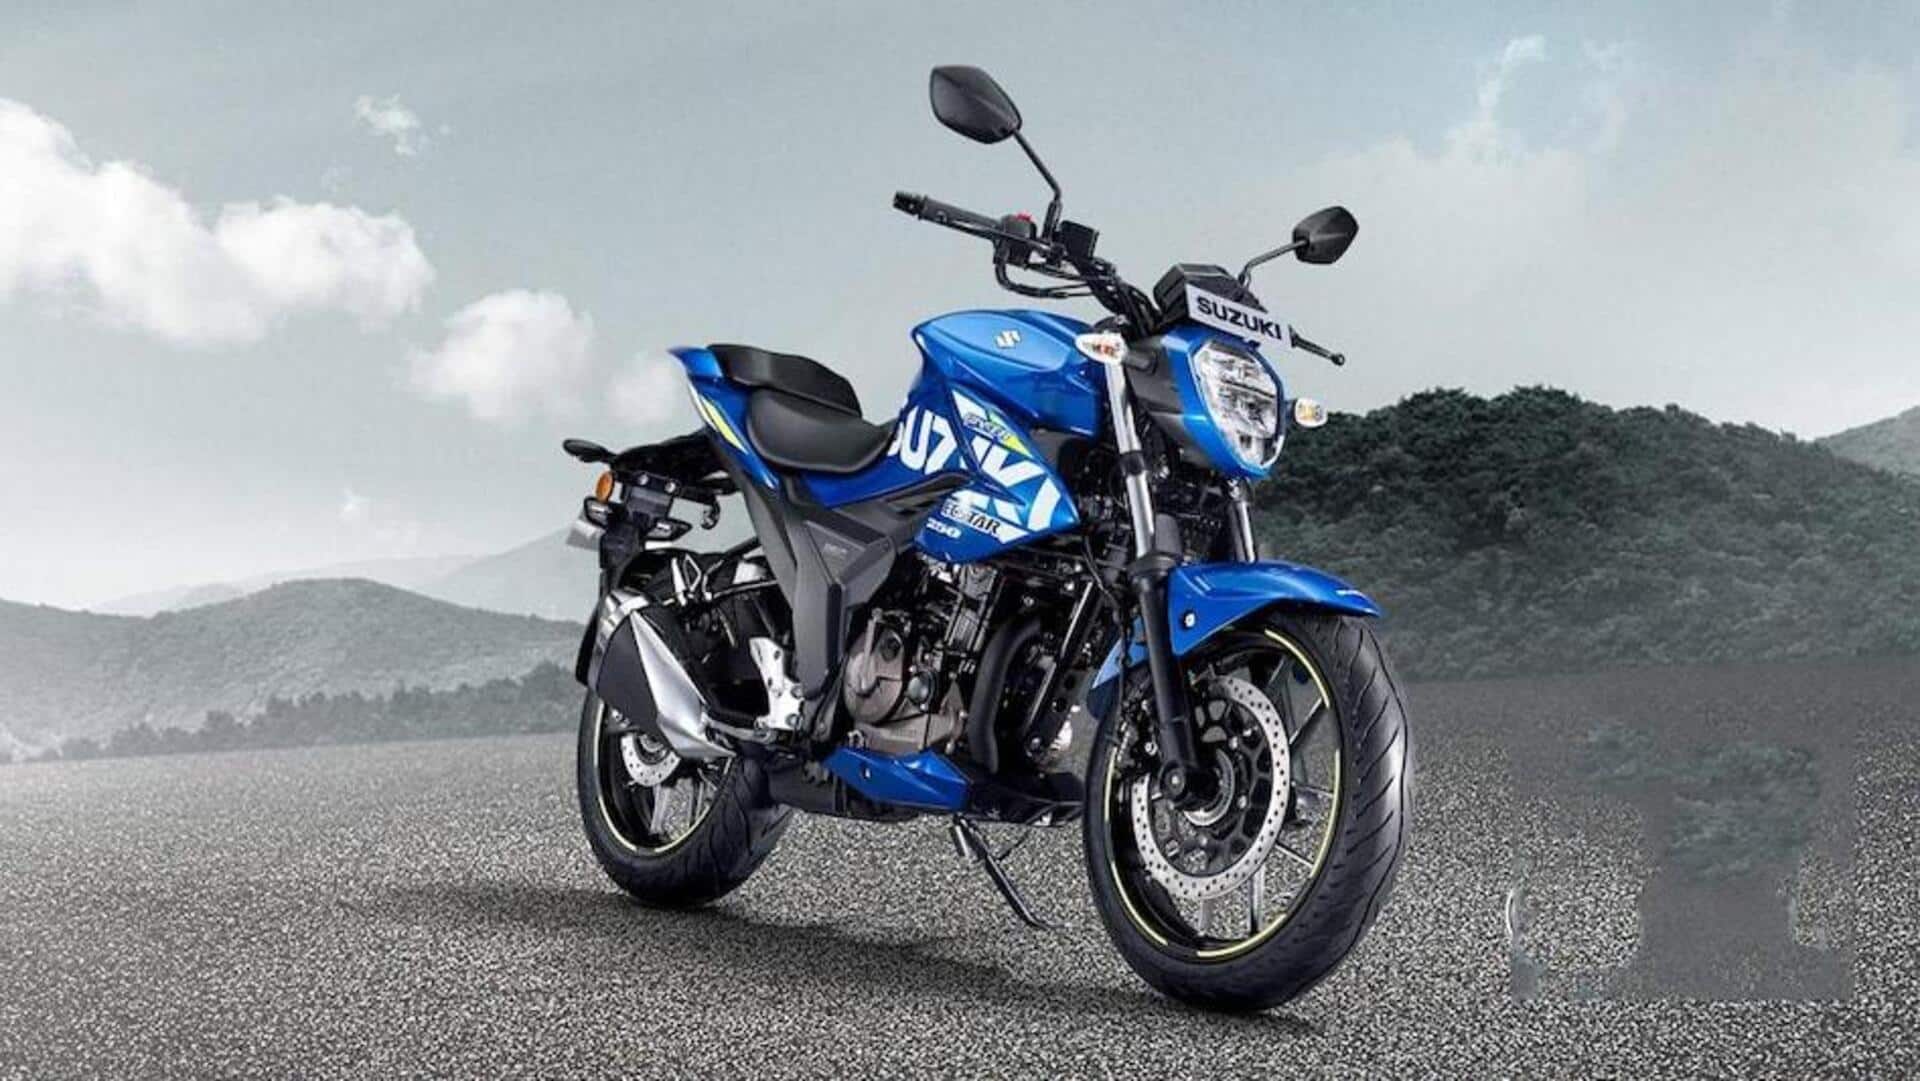 Suzuki Motorcycle India achieves highest-ever monthly sales in May